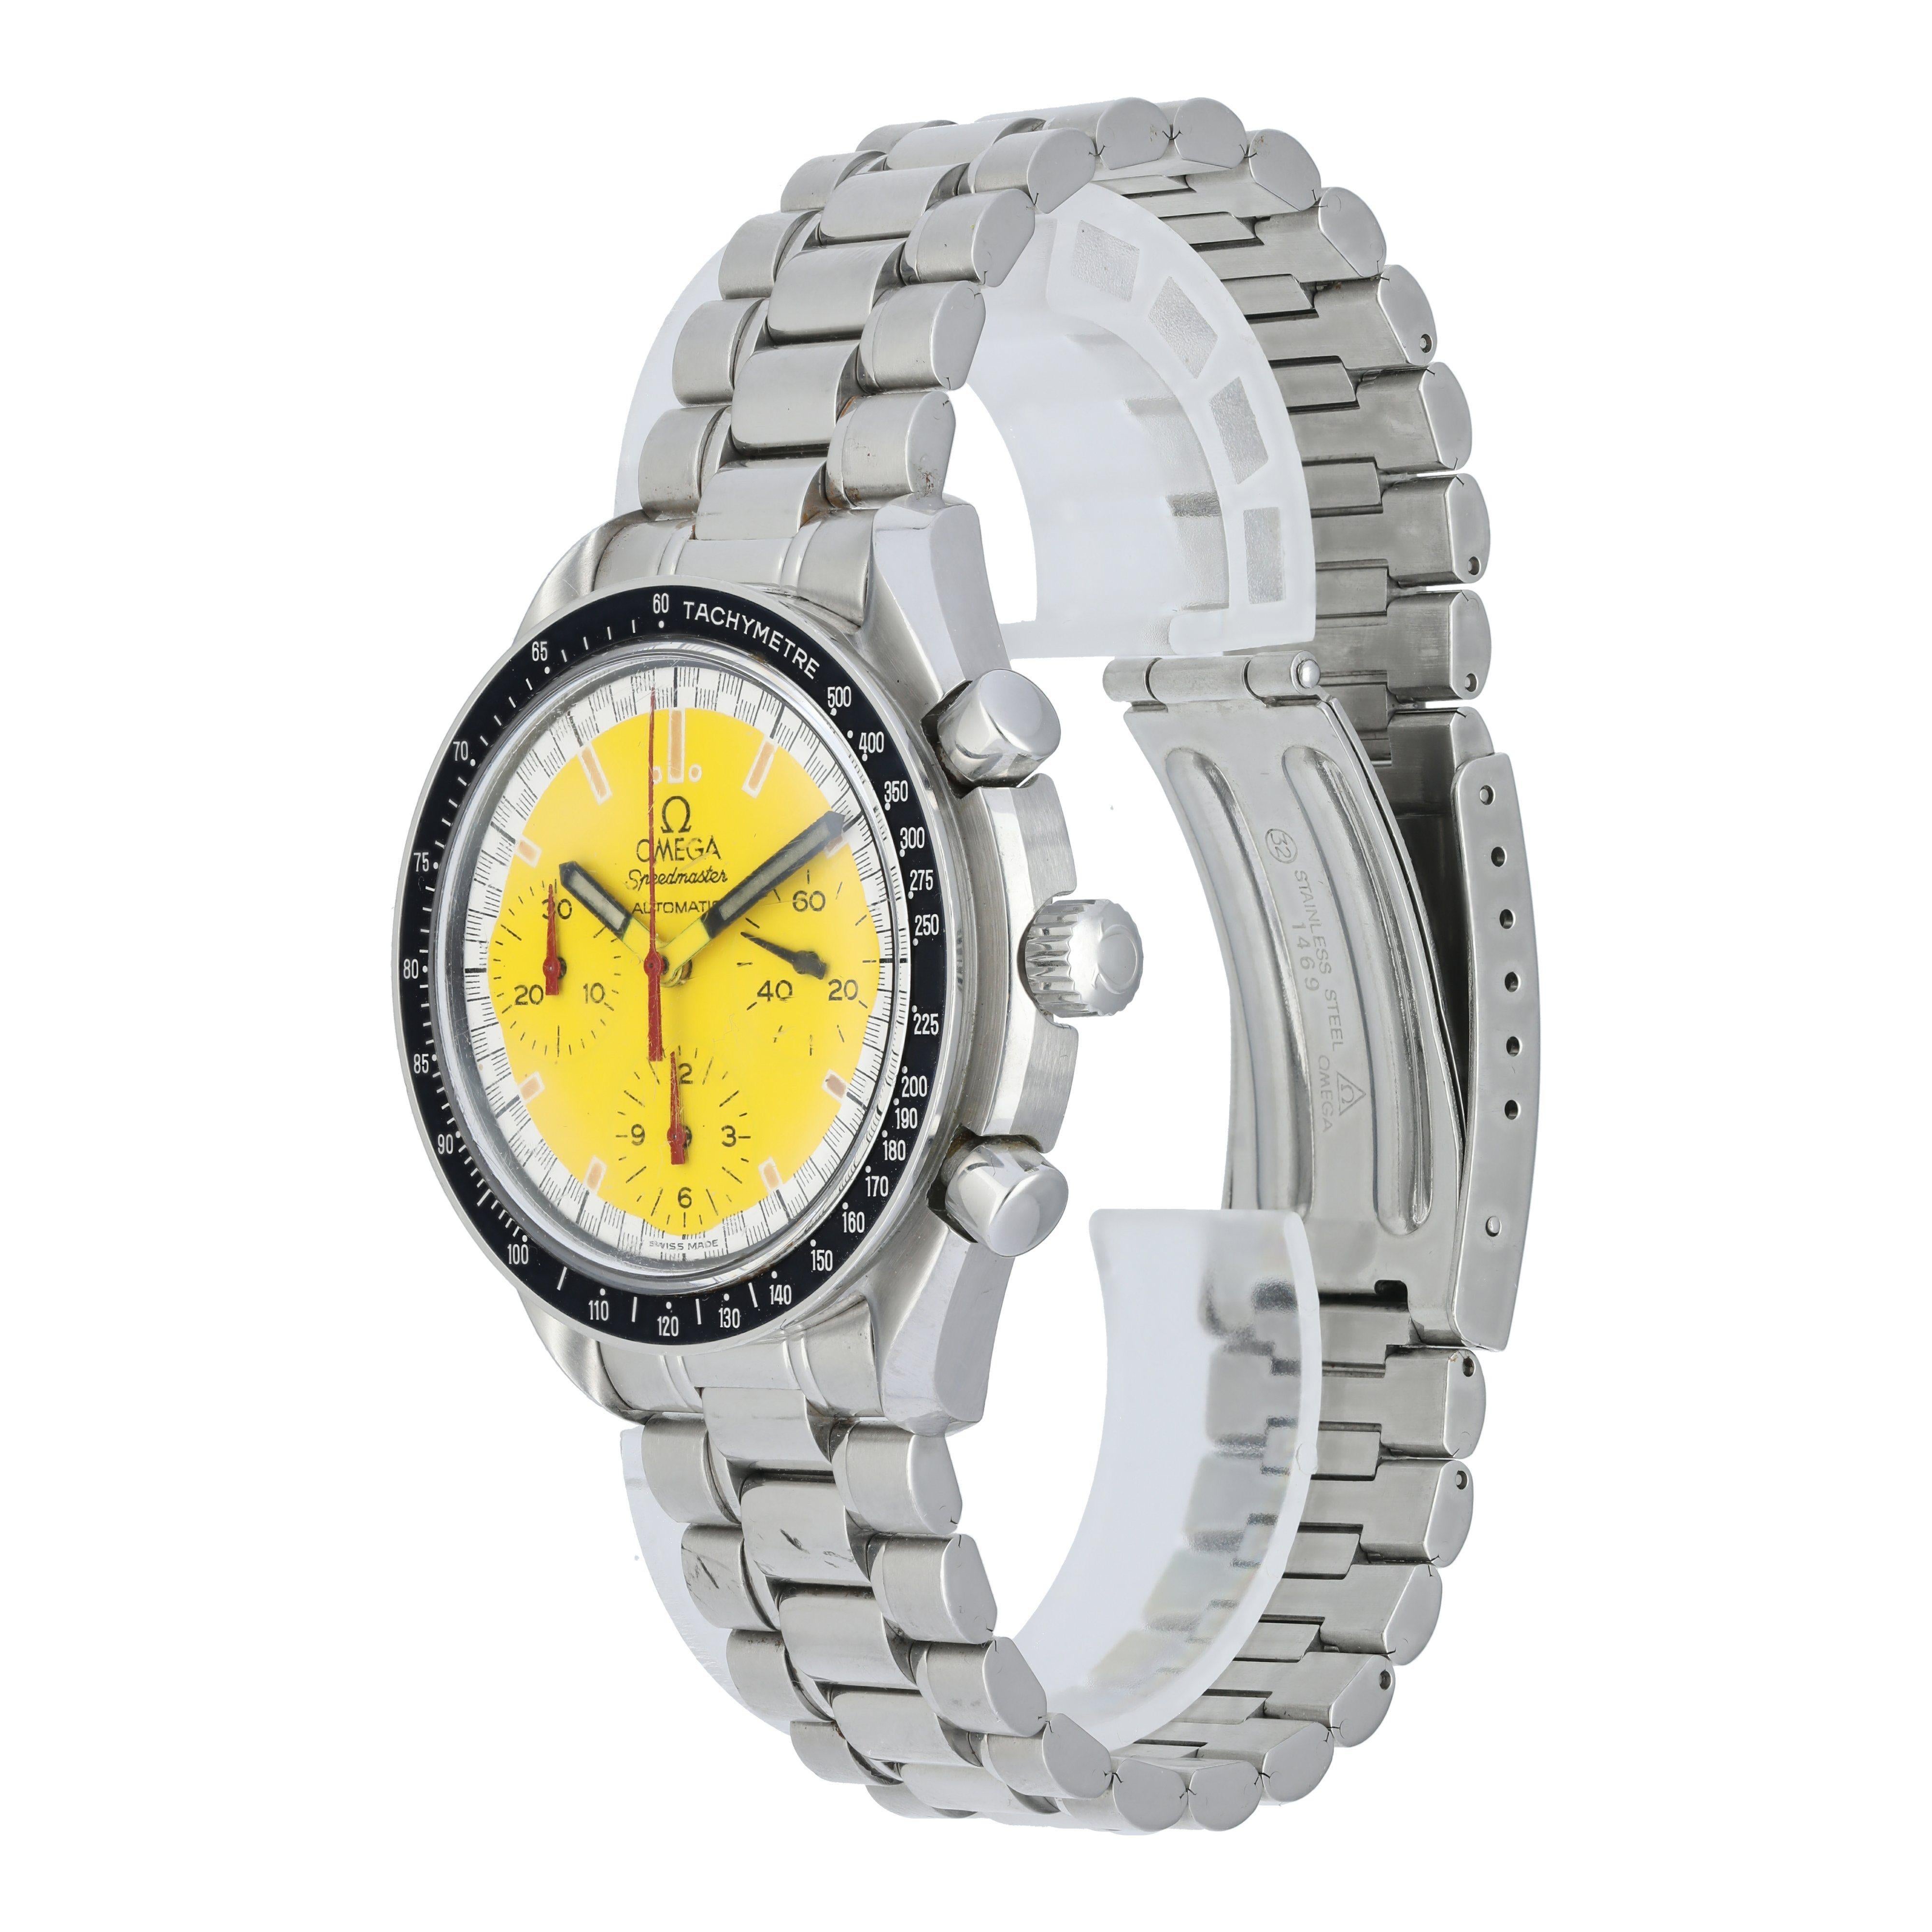 Omega Speedmaster 3810.12.40 Men's Watch. 
39mm Stainless Steel case. 
Stainless Steel Tachymeter bezel with black bezel insert. 
Yellow dial with Steel hands and index hour markers. 
Minute markers on the outer dial. 
Stainless Steel Bracelet with